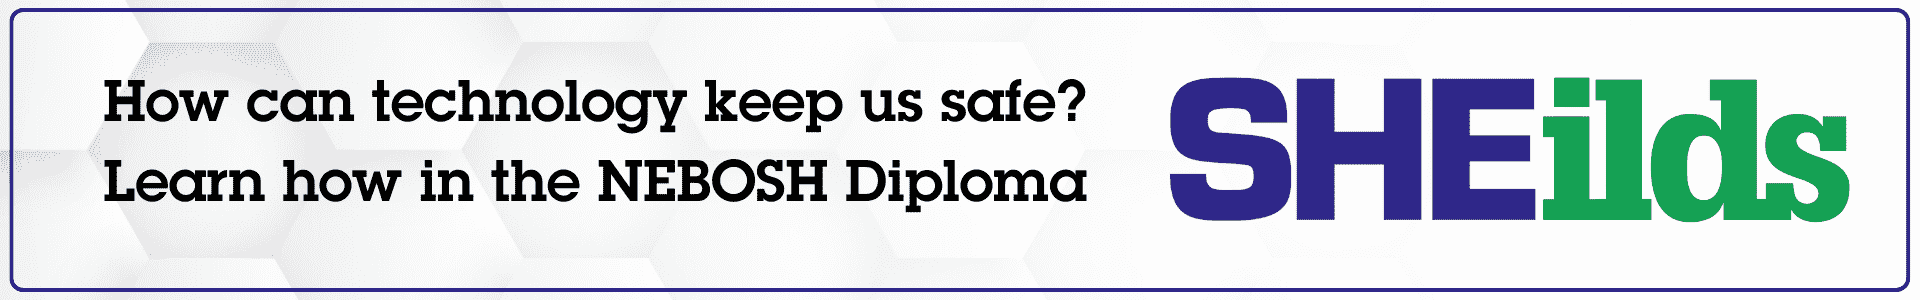 How can technology keep us safe? Learn how in the NEBOSH Diploma